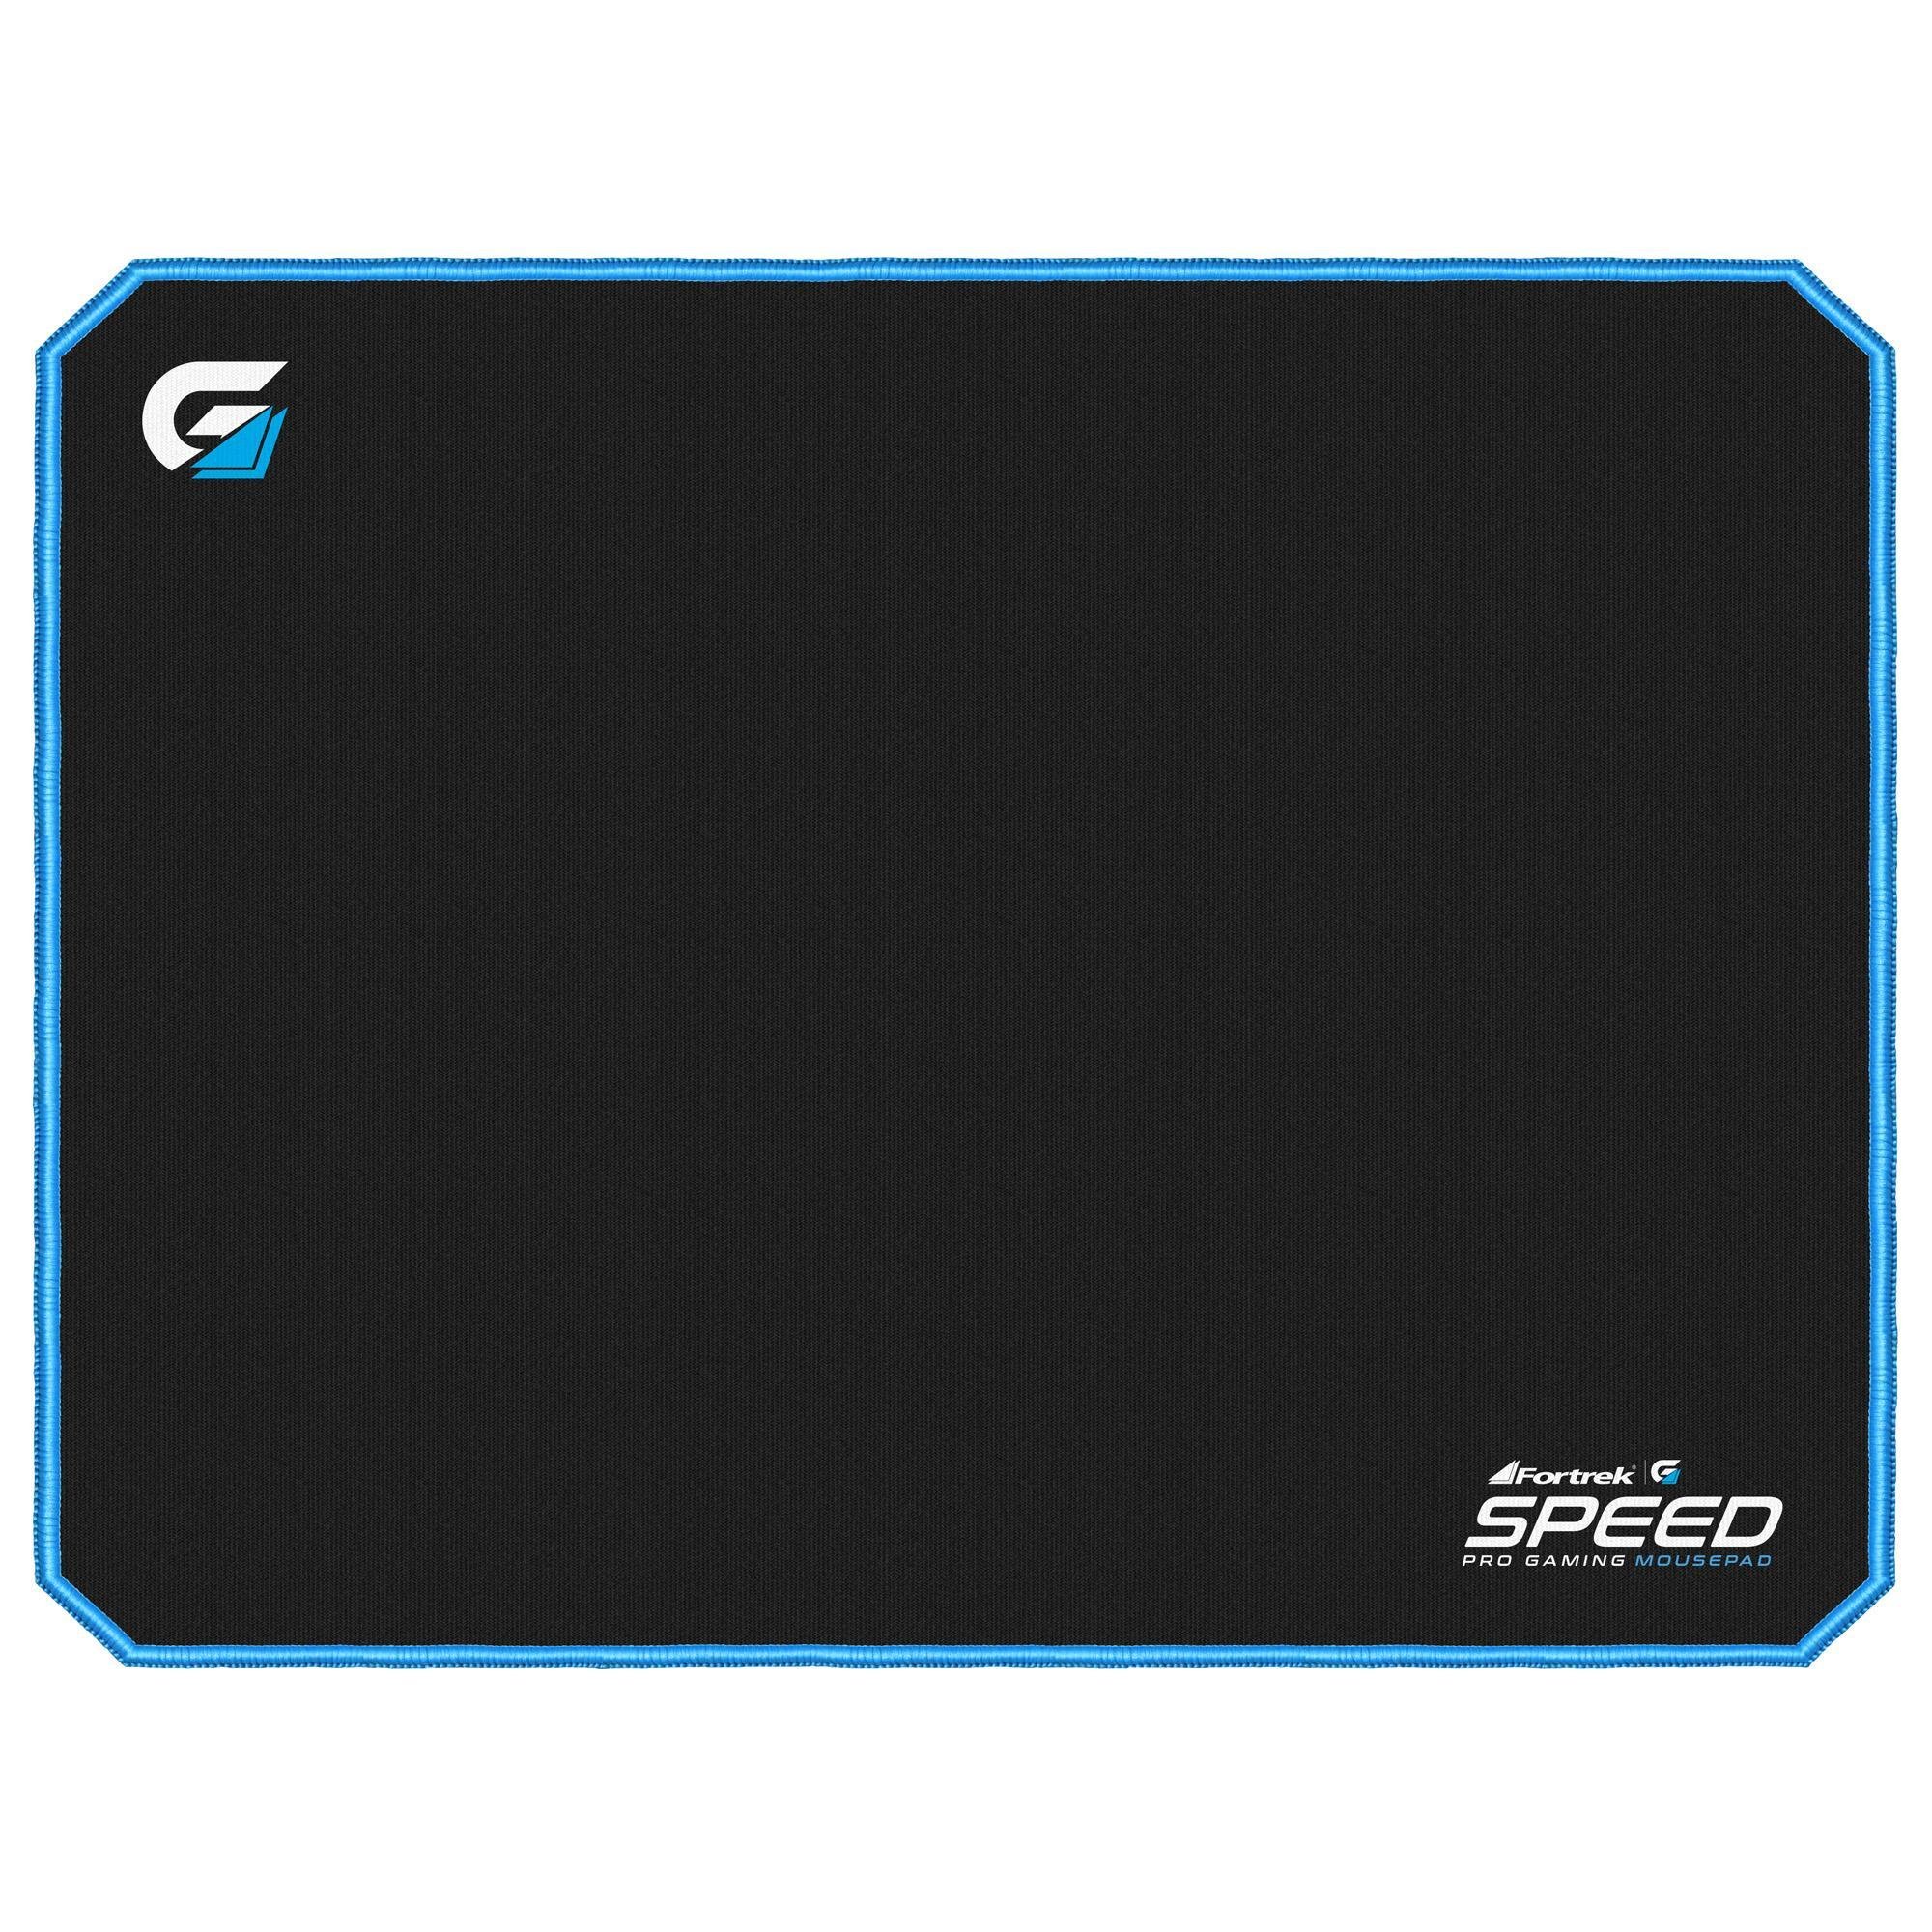 Mouse Pad Fortrek Gamer SPEED MPG 102 Azul (440x350mm) 